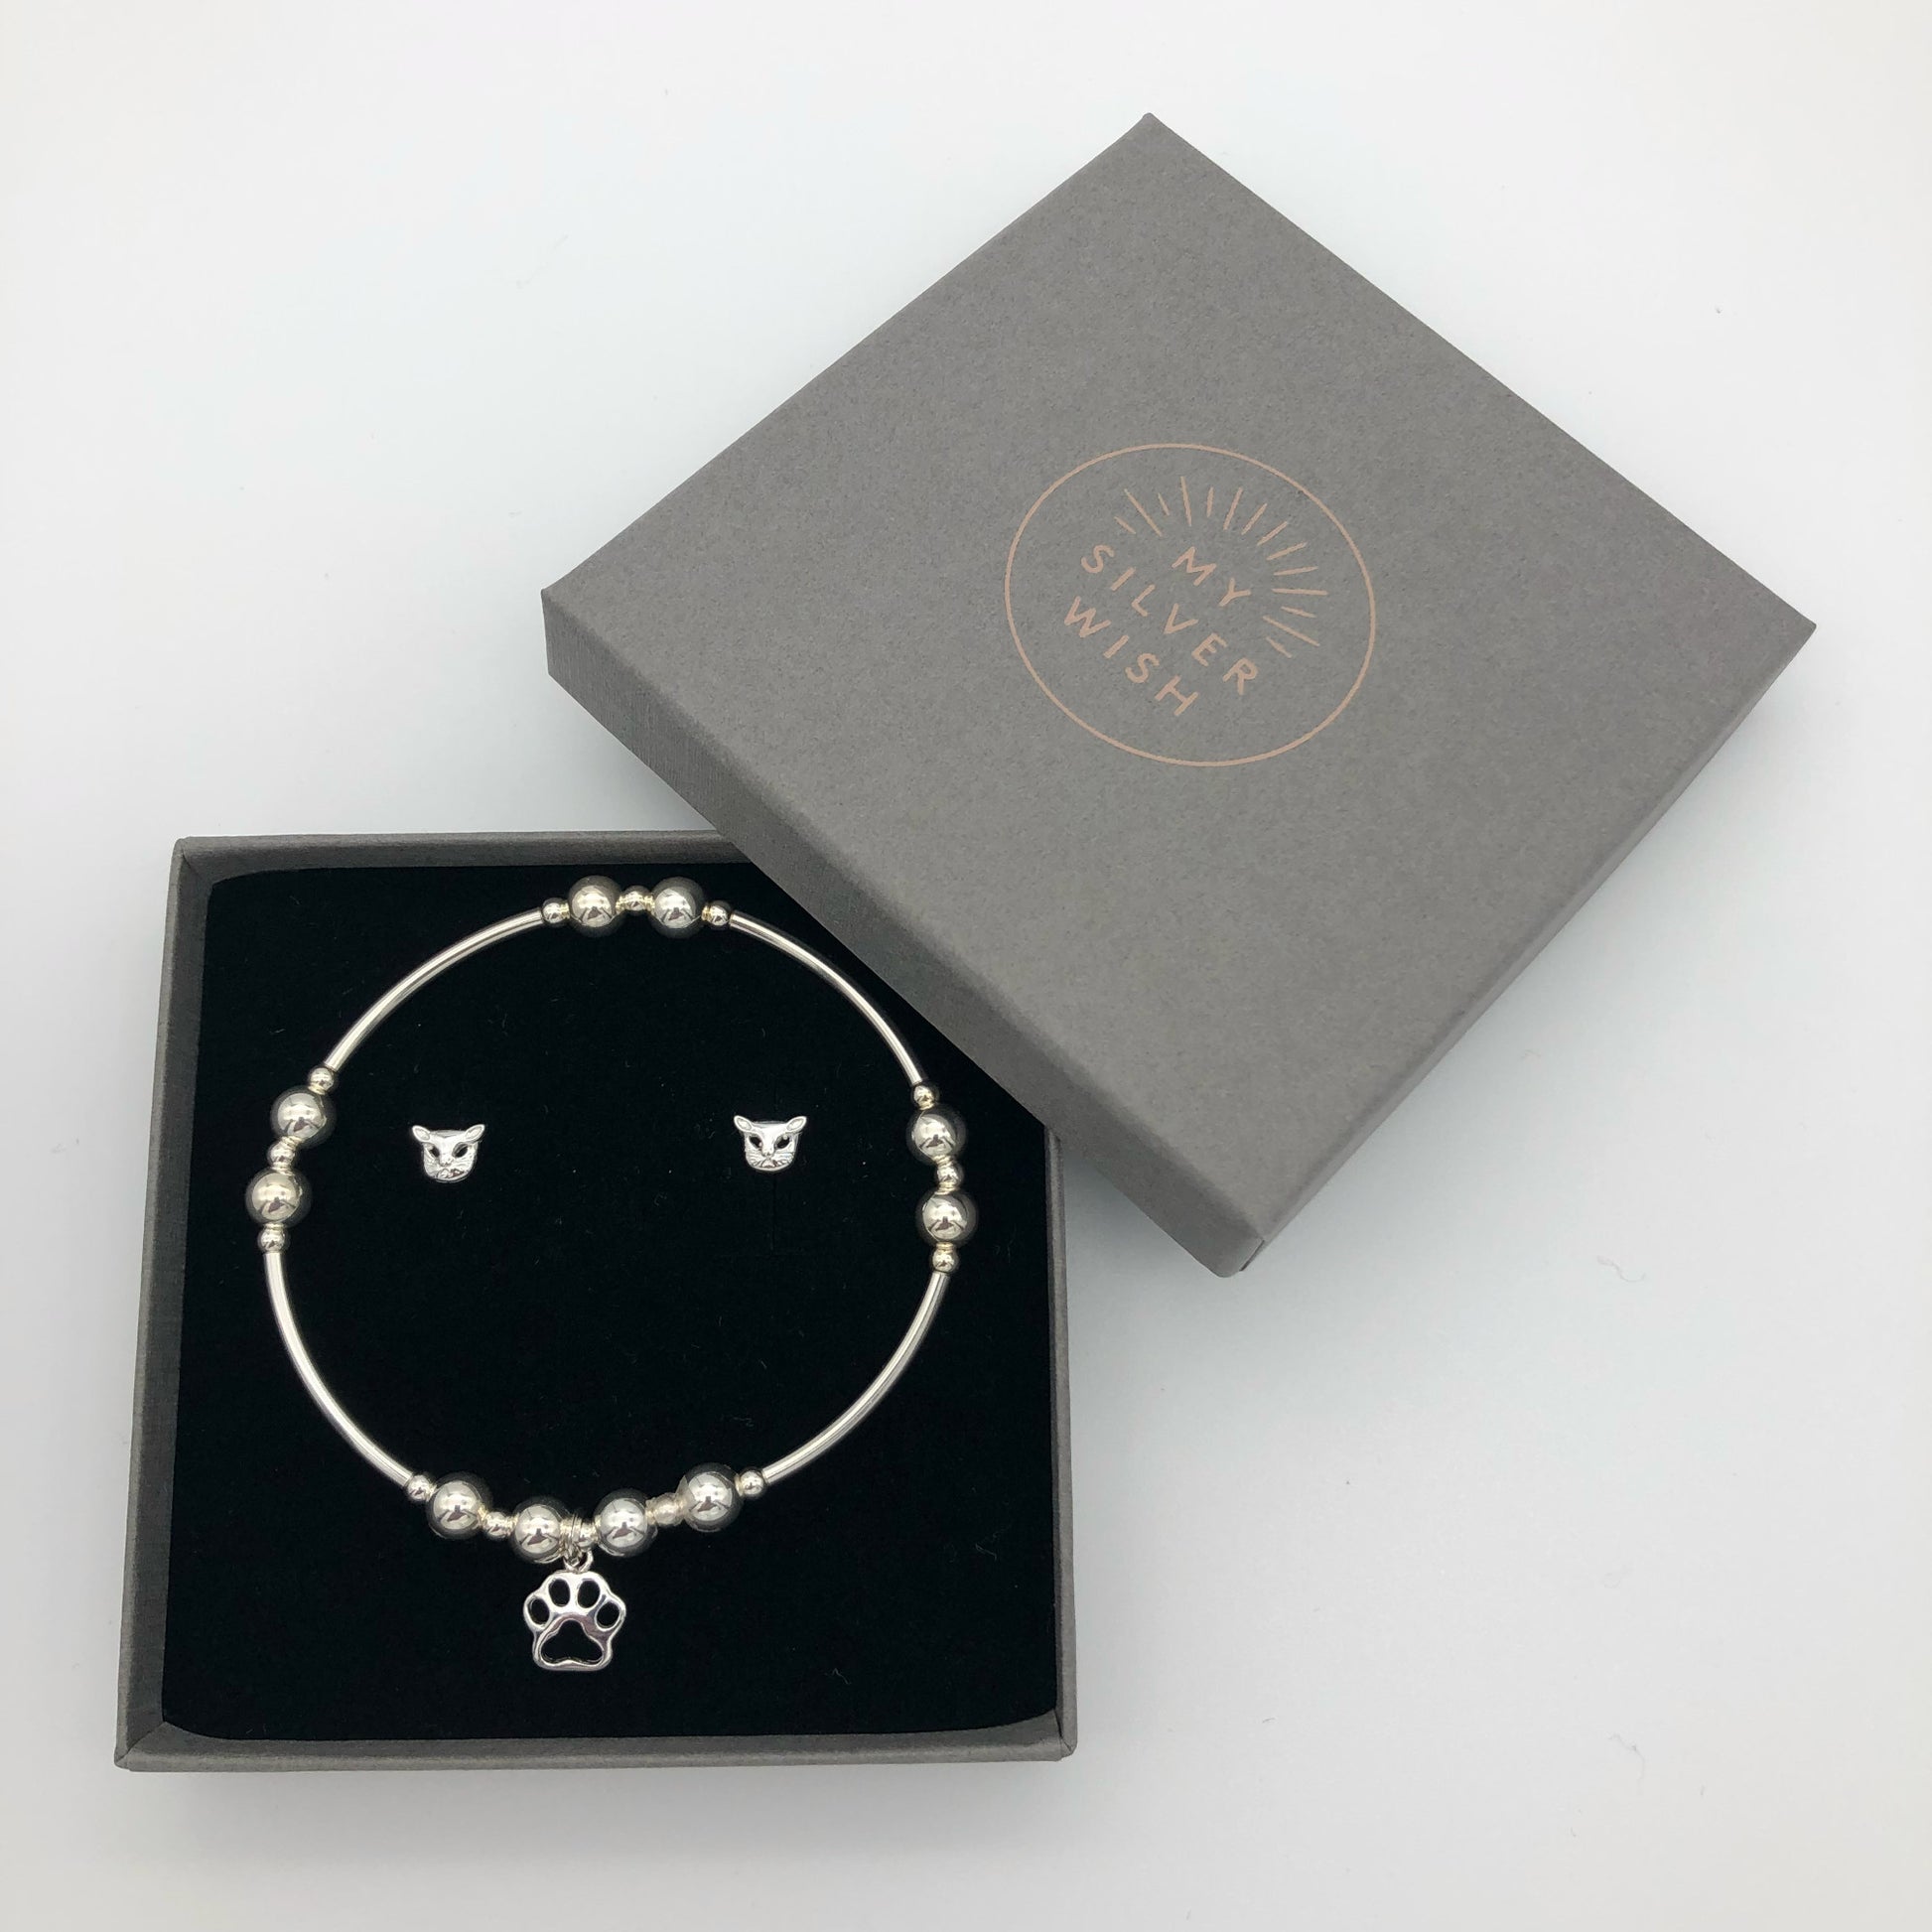 Cat charm sterling silver stacking bracelet and stud earring women's jewellery gift set by My Silver Wish